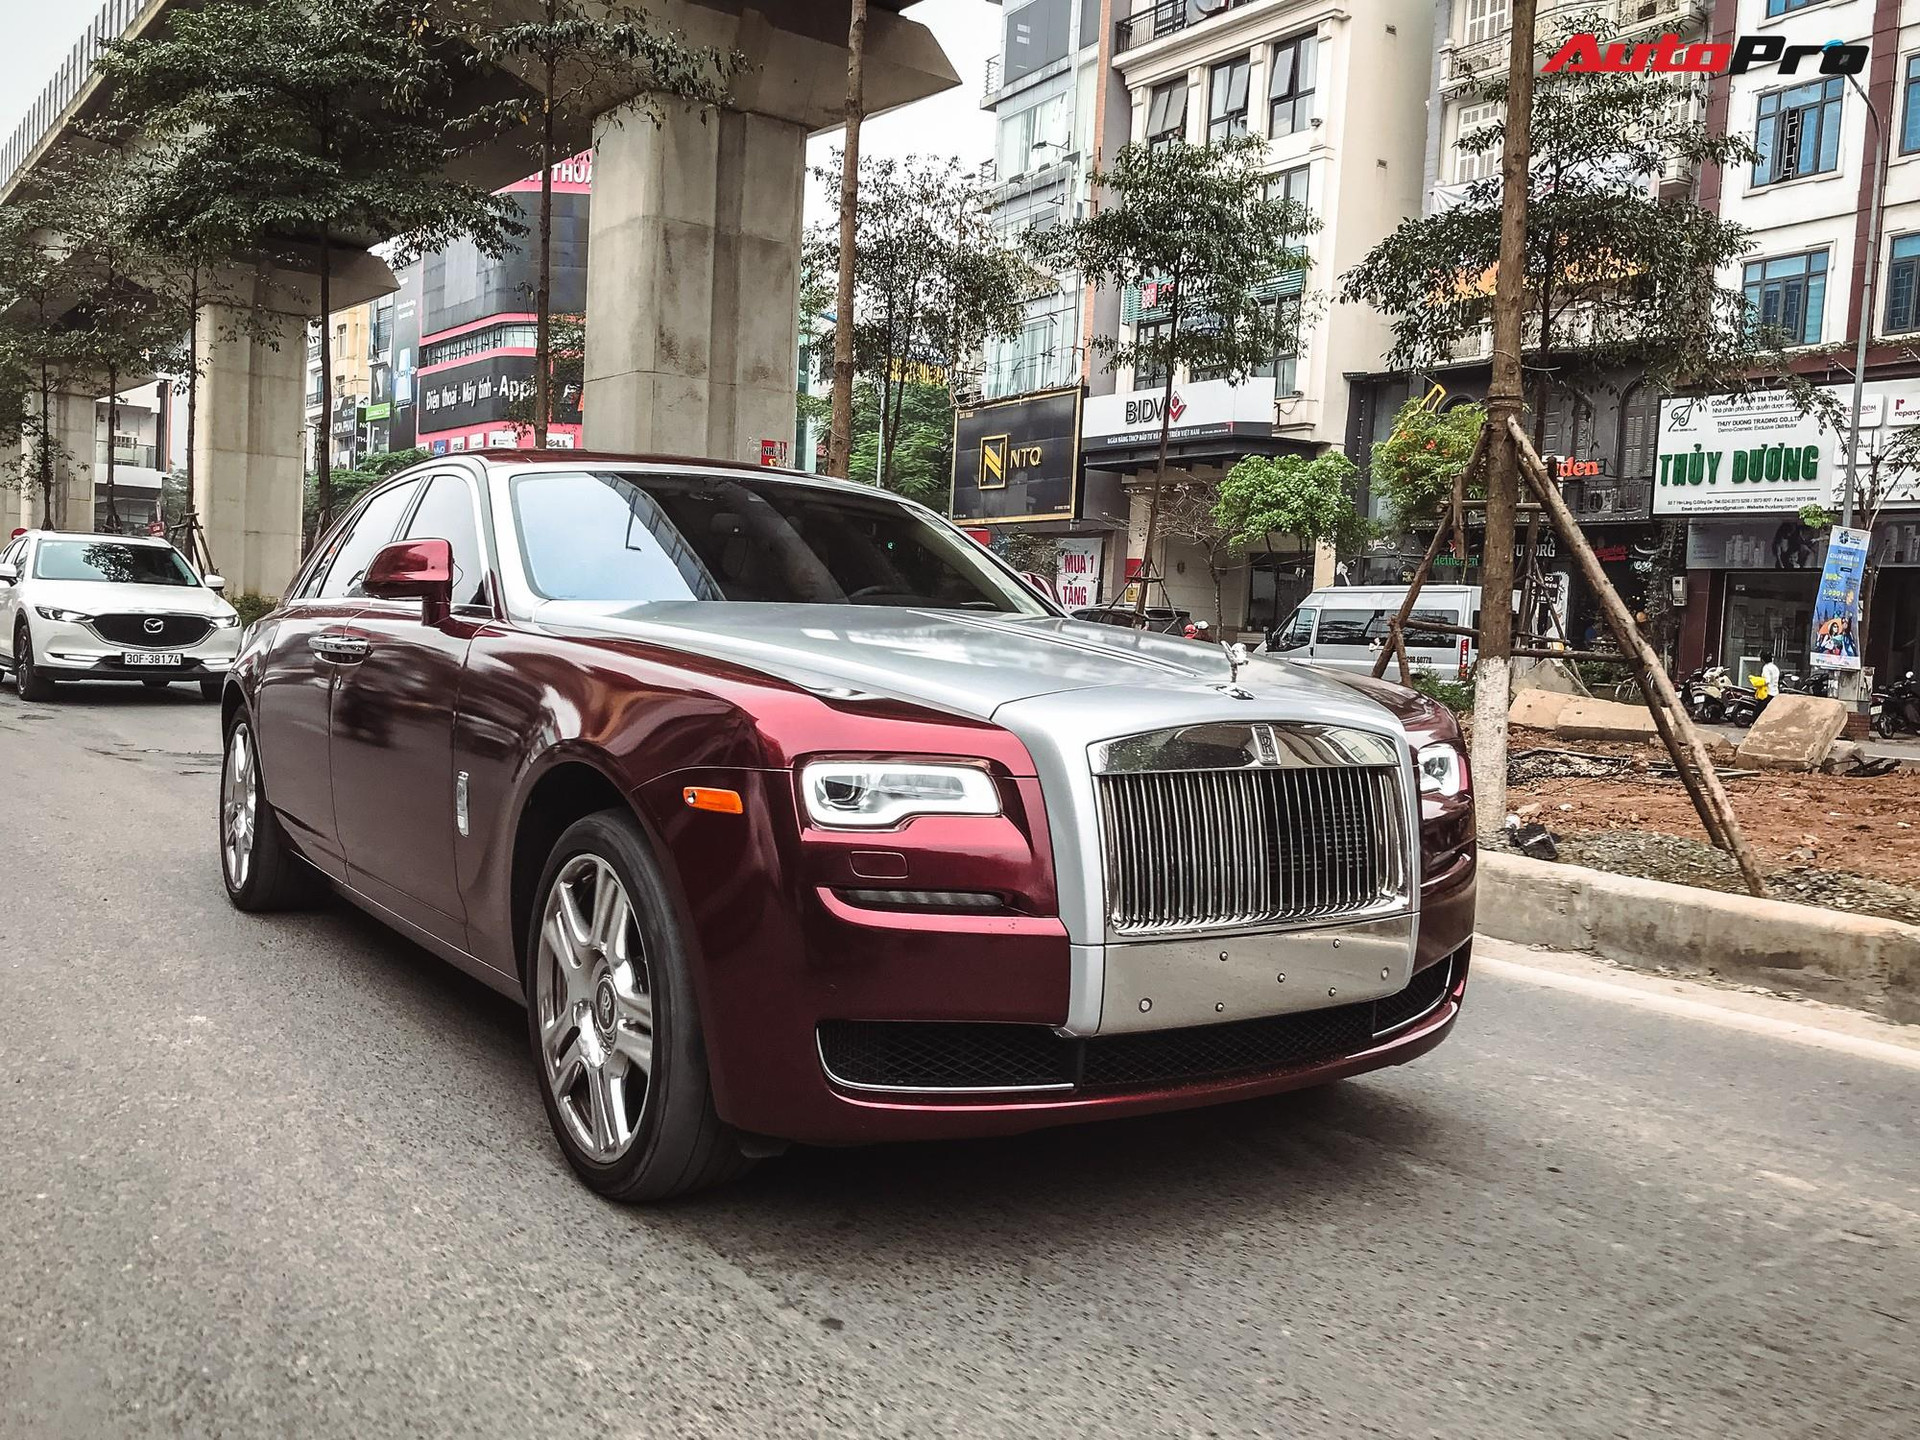 Red on Red Extremely Stylish Rolls Royce Wraith Boasting Painted Grille   CARiDcom Gallery